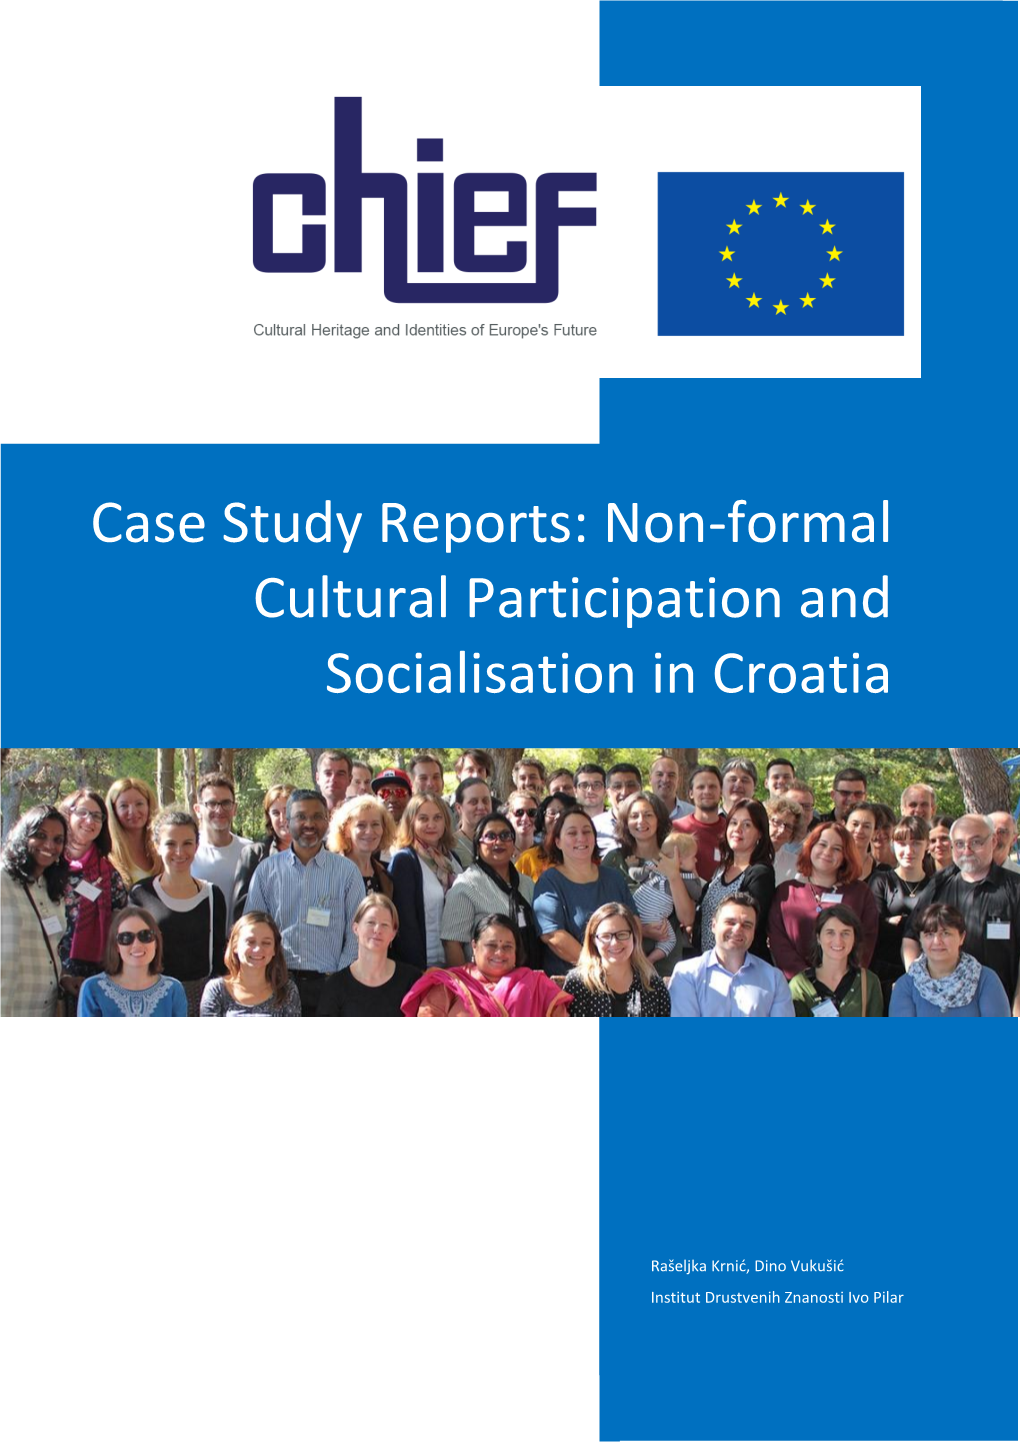 Case Study Reports: Non-Formal Cultural Participation and Socialisation in Croatia